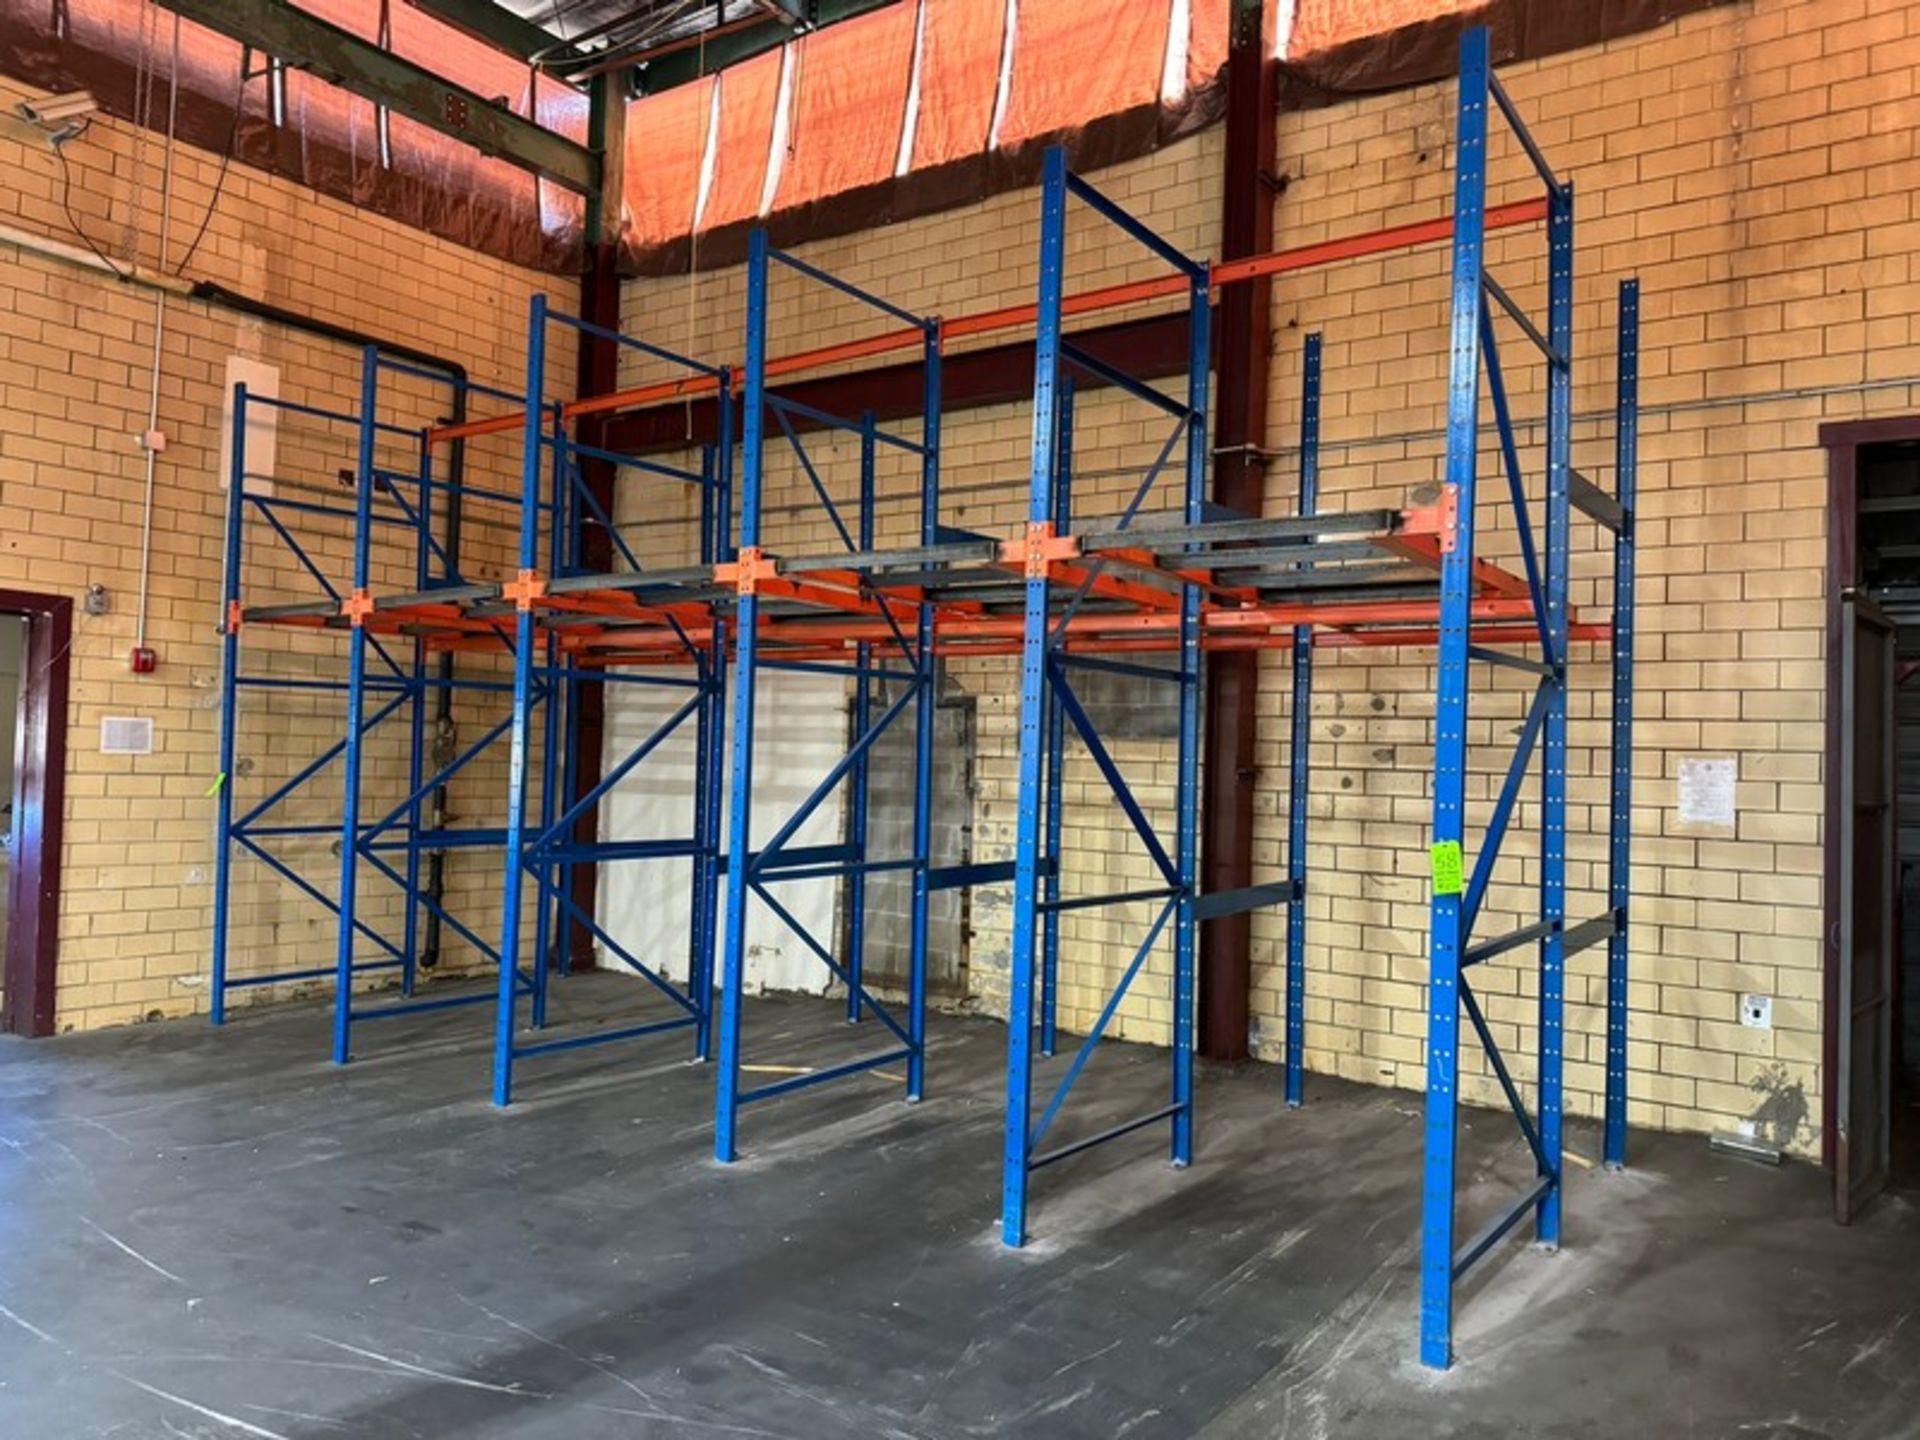 5-Sections of 2-Deep Drive-In Pallet Racking